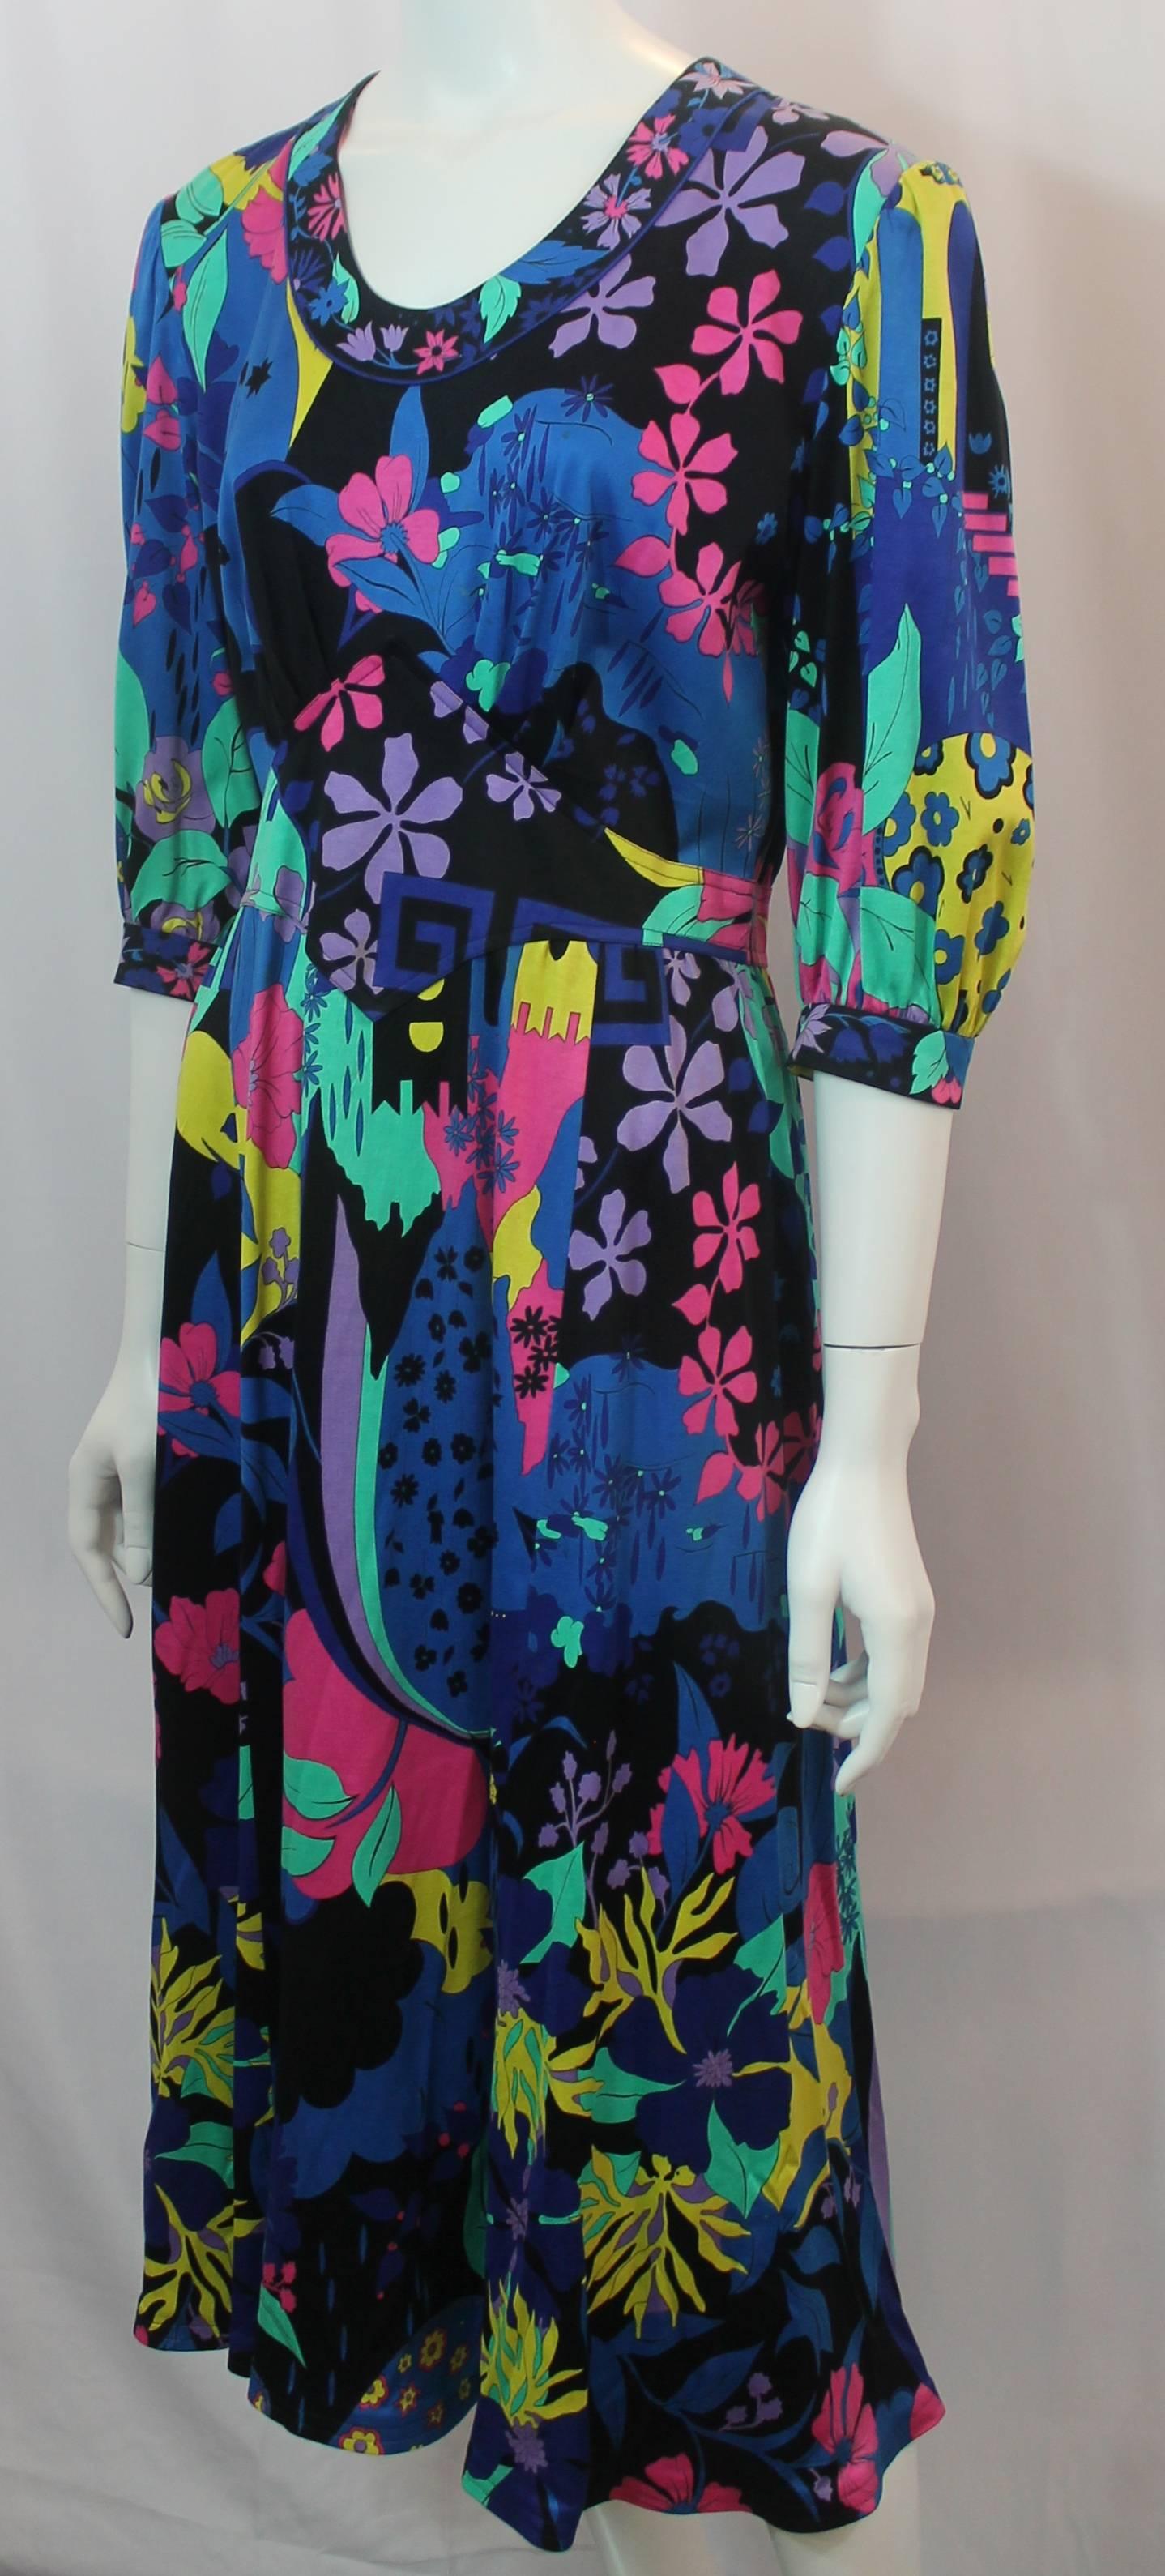 Averardo Bessi Vintage Multi-Colored Floral Dress - 12 - circa 1960's-1970's. This unique dress is floral printed in bold colors. It has elbow-length sleeves and a zipper in the back. It is in fair vintage condition with stains consistent with age